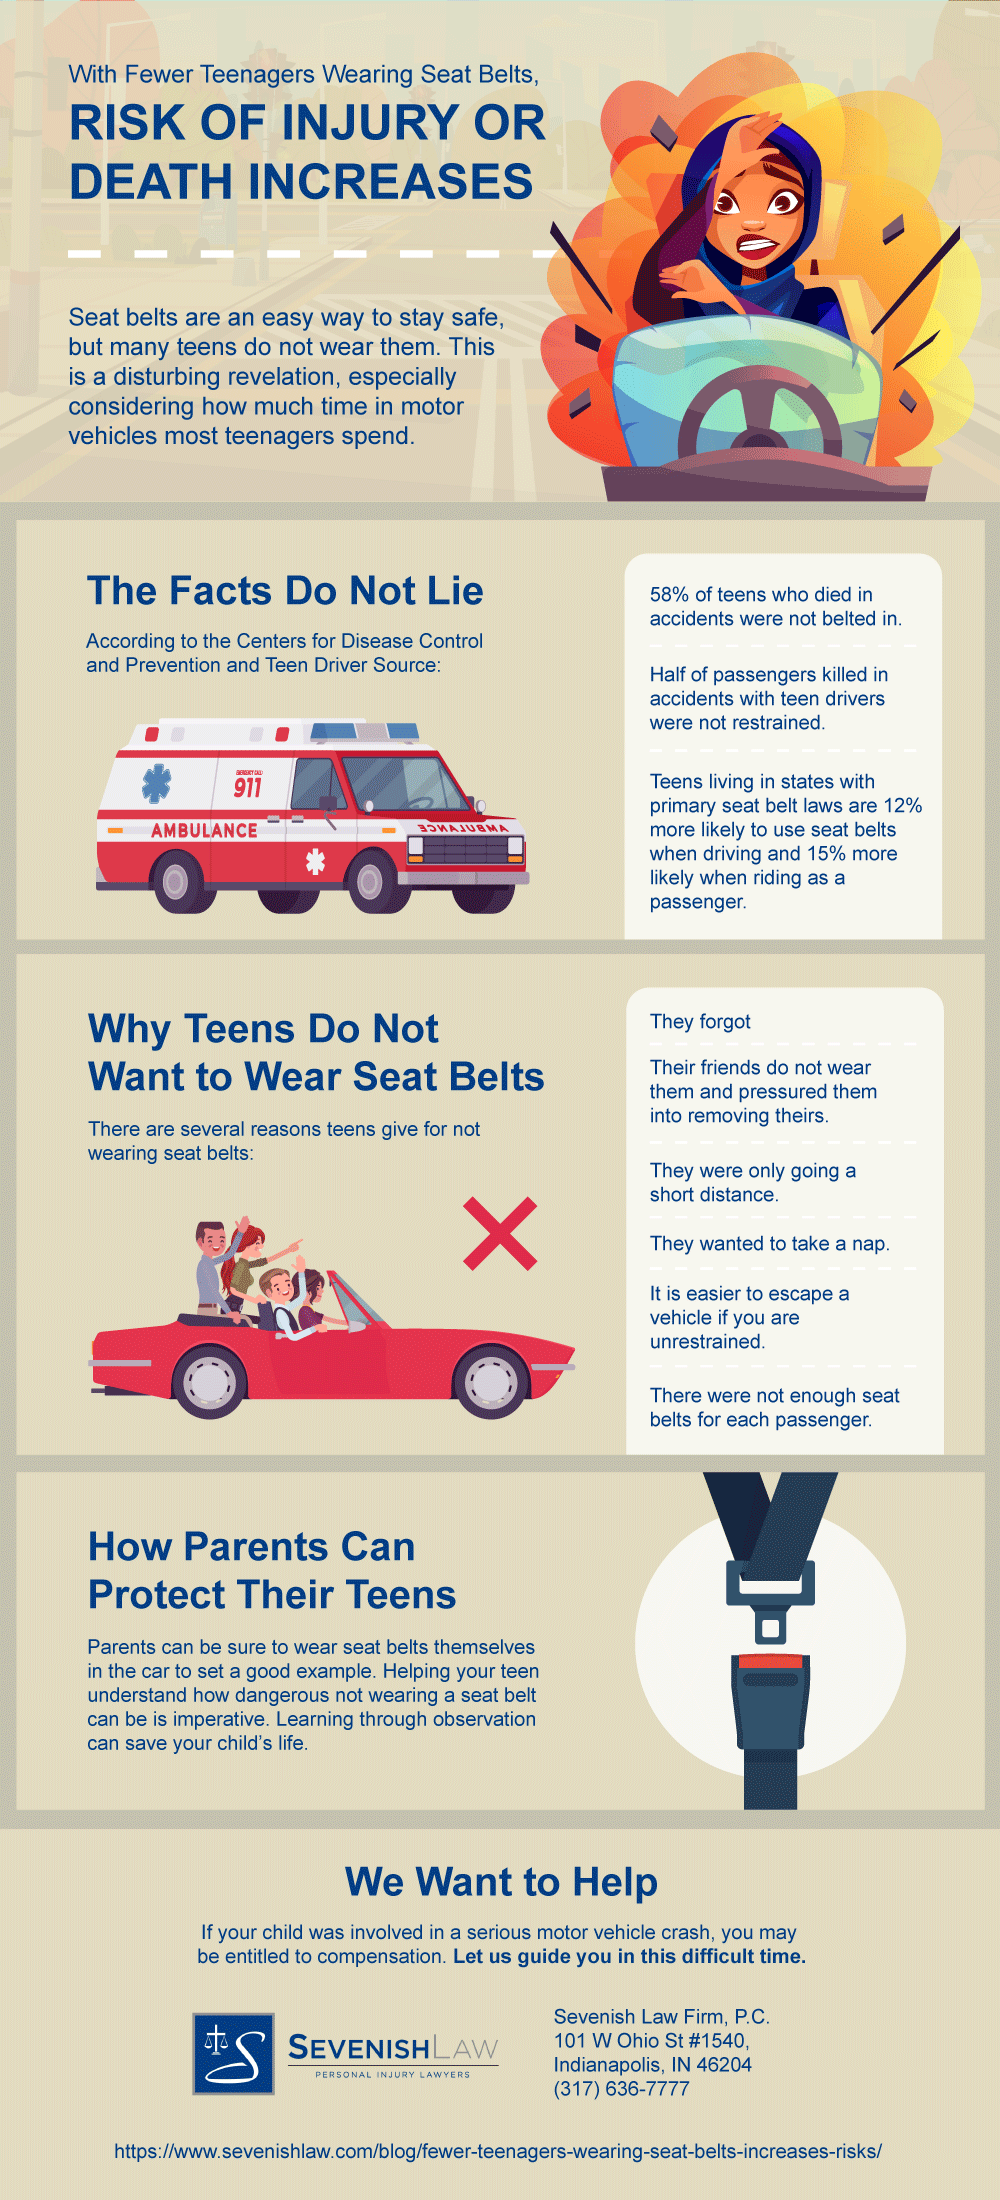 With Fewer Teenagers Wearing Seat Belts, Risk Of Injury Or Death Increases